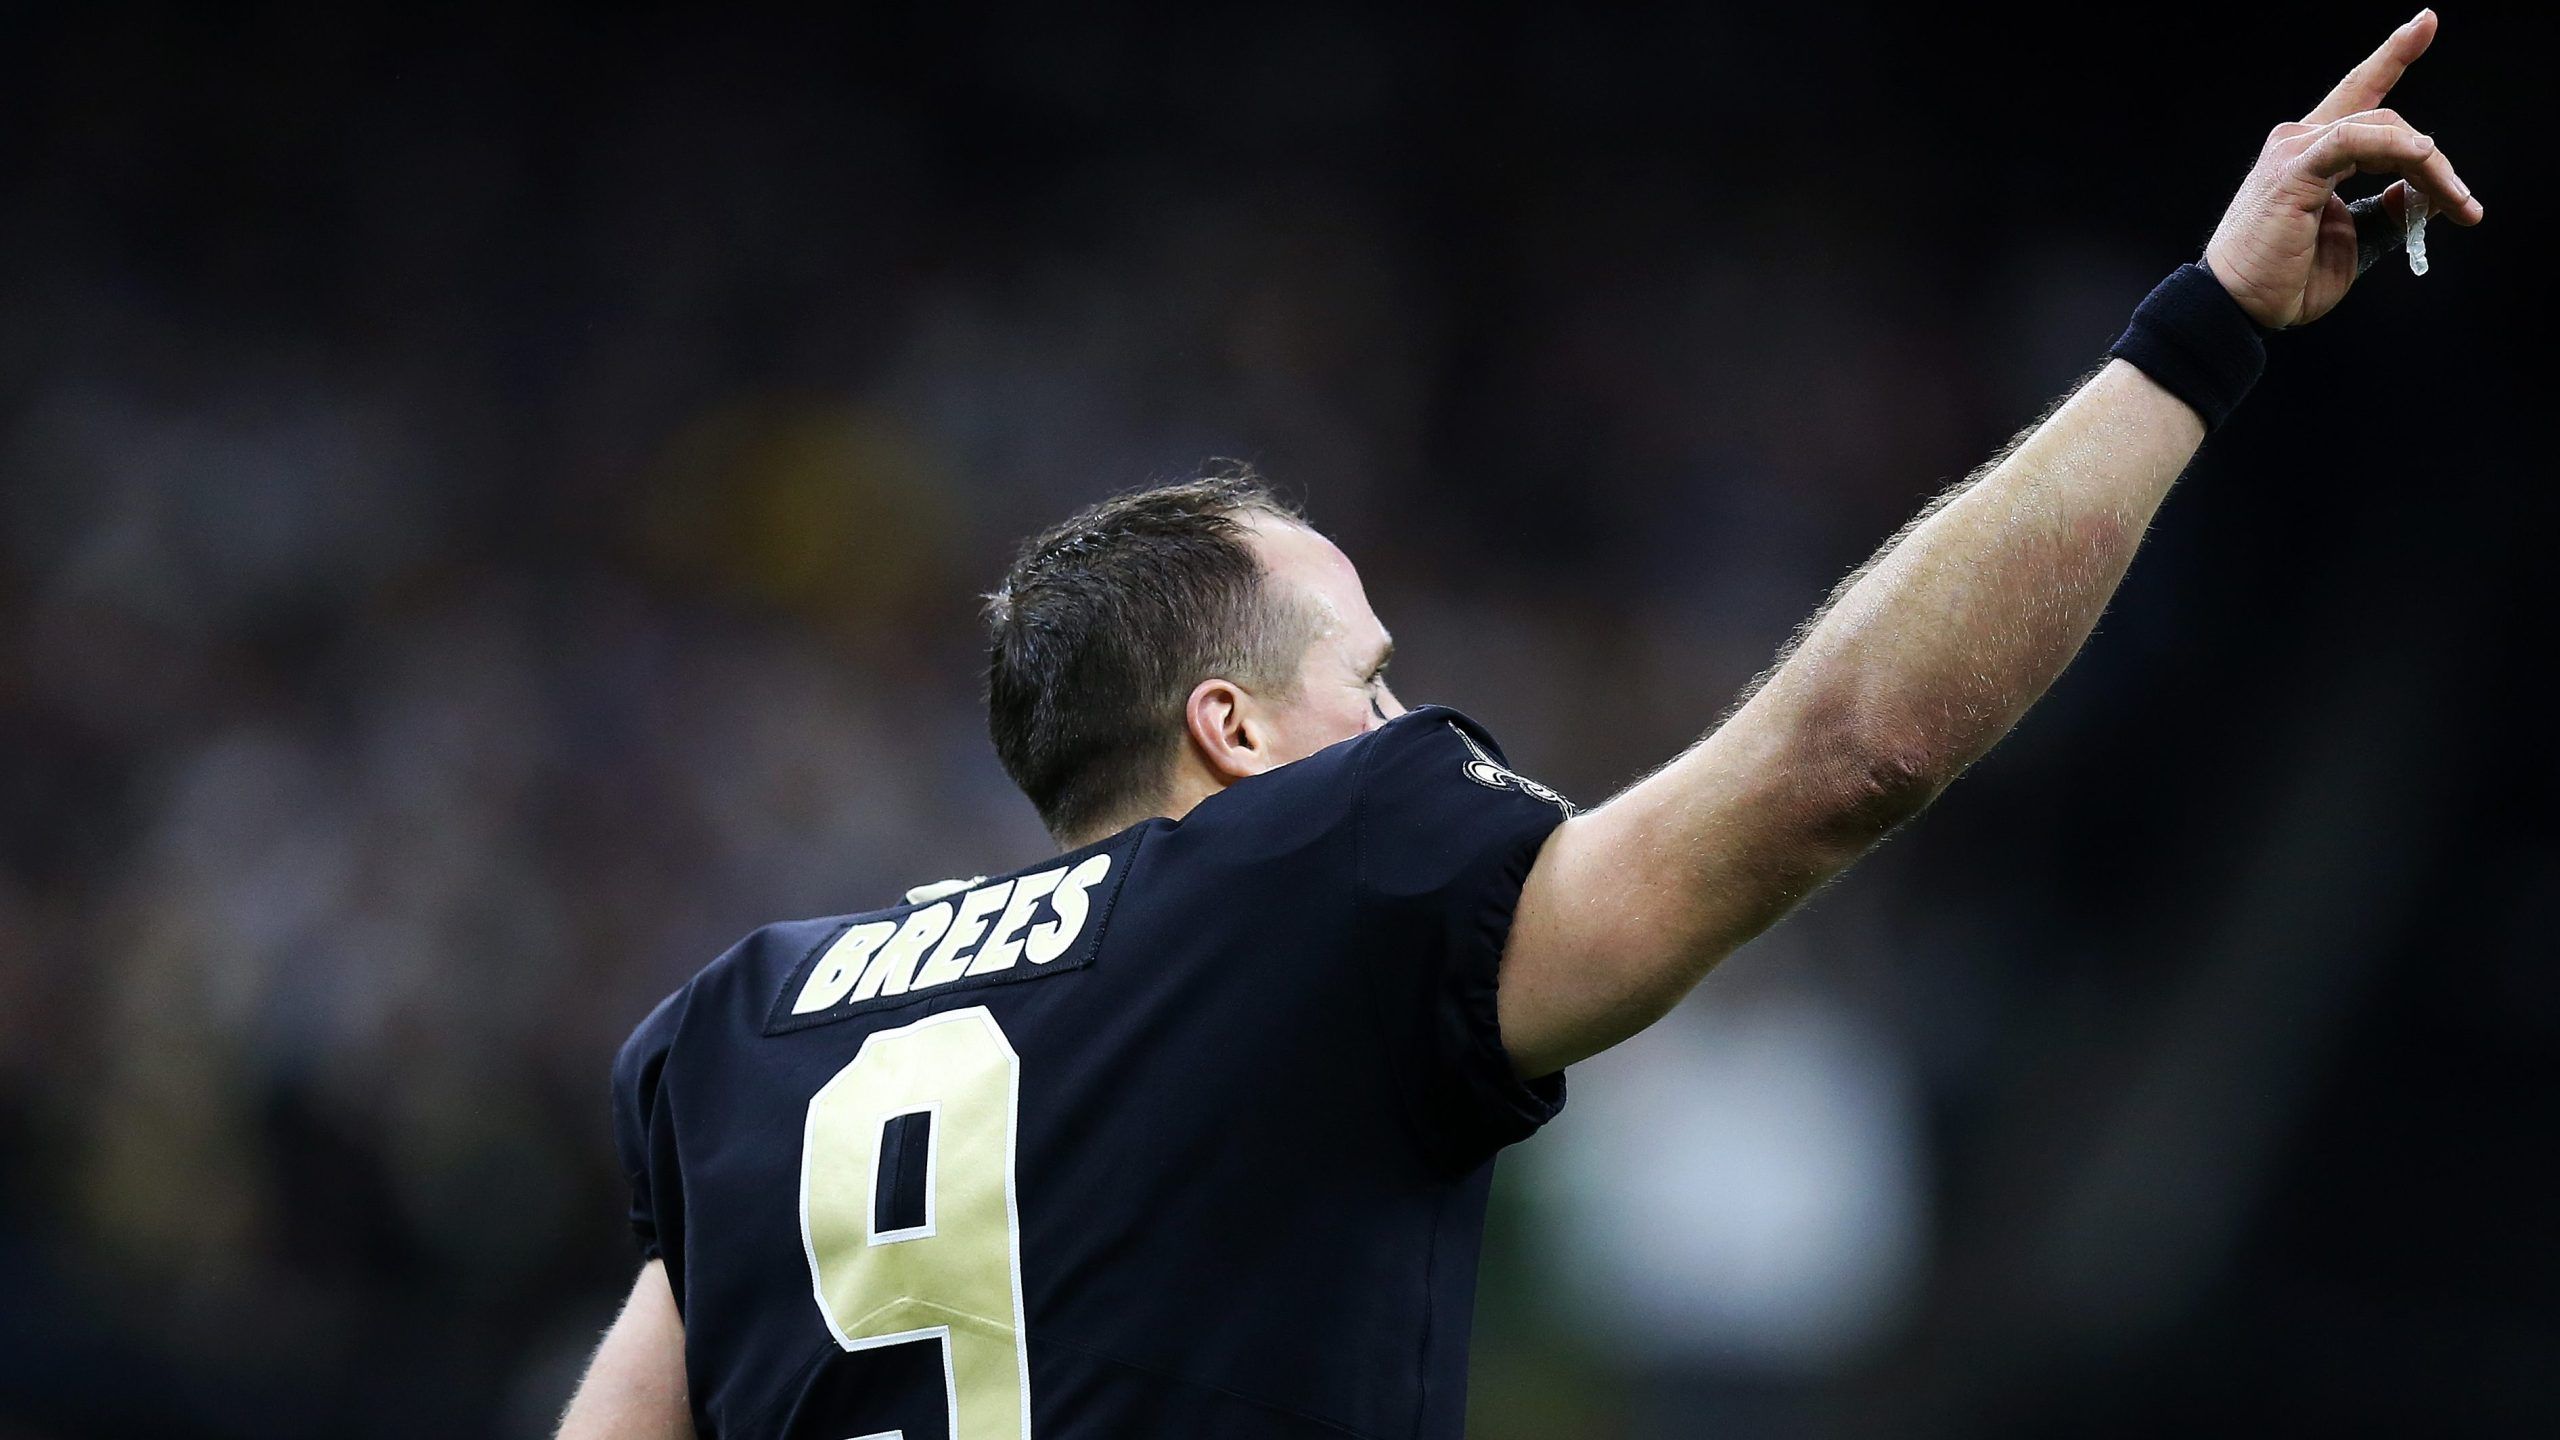 Purdue Grad Drew Brees Passes Peyton Manning For Most NFL TD Passes All Time